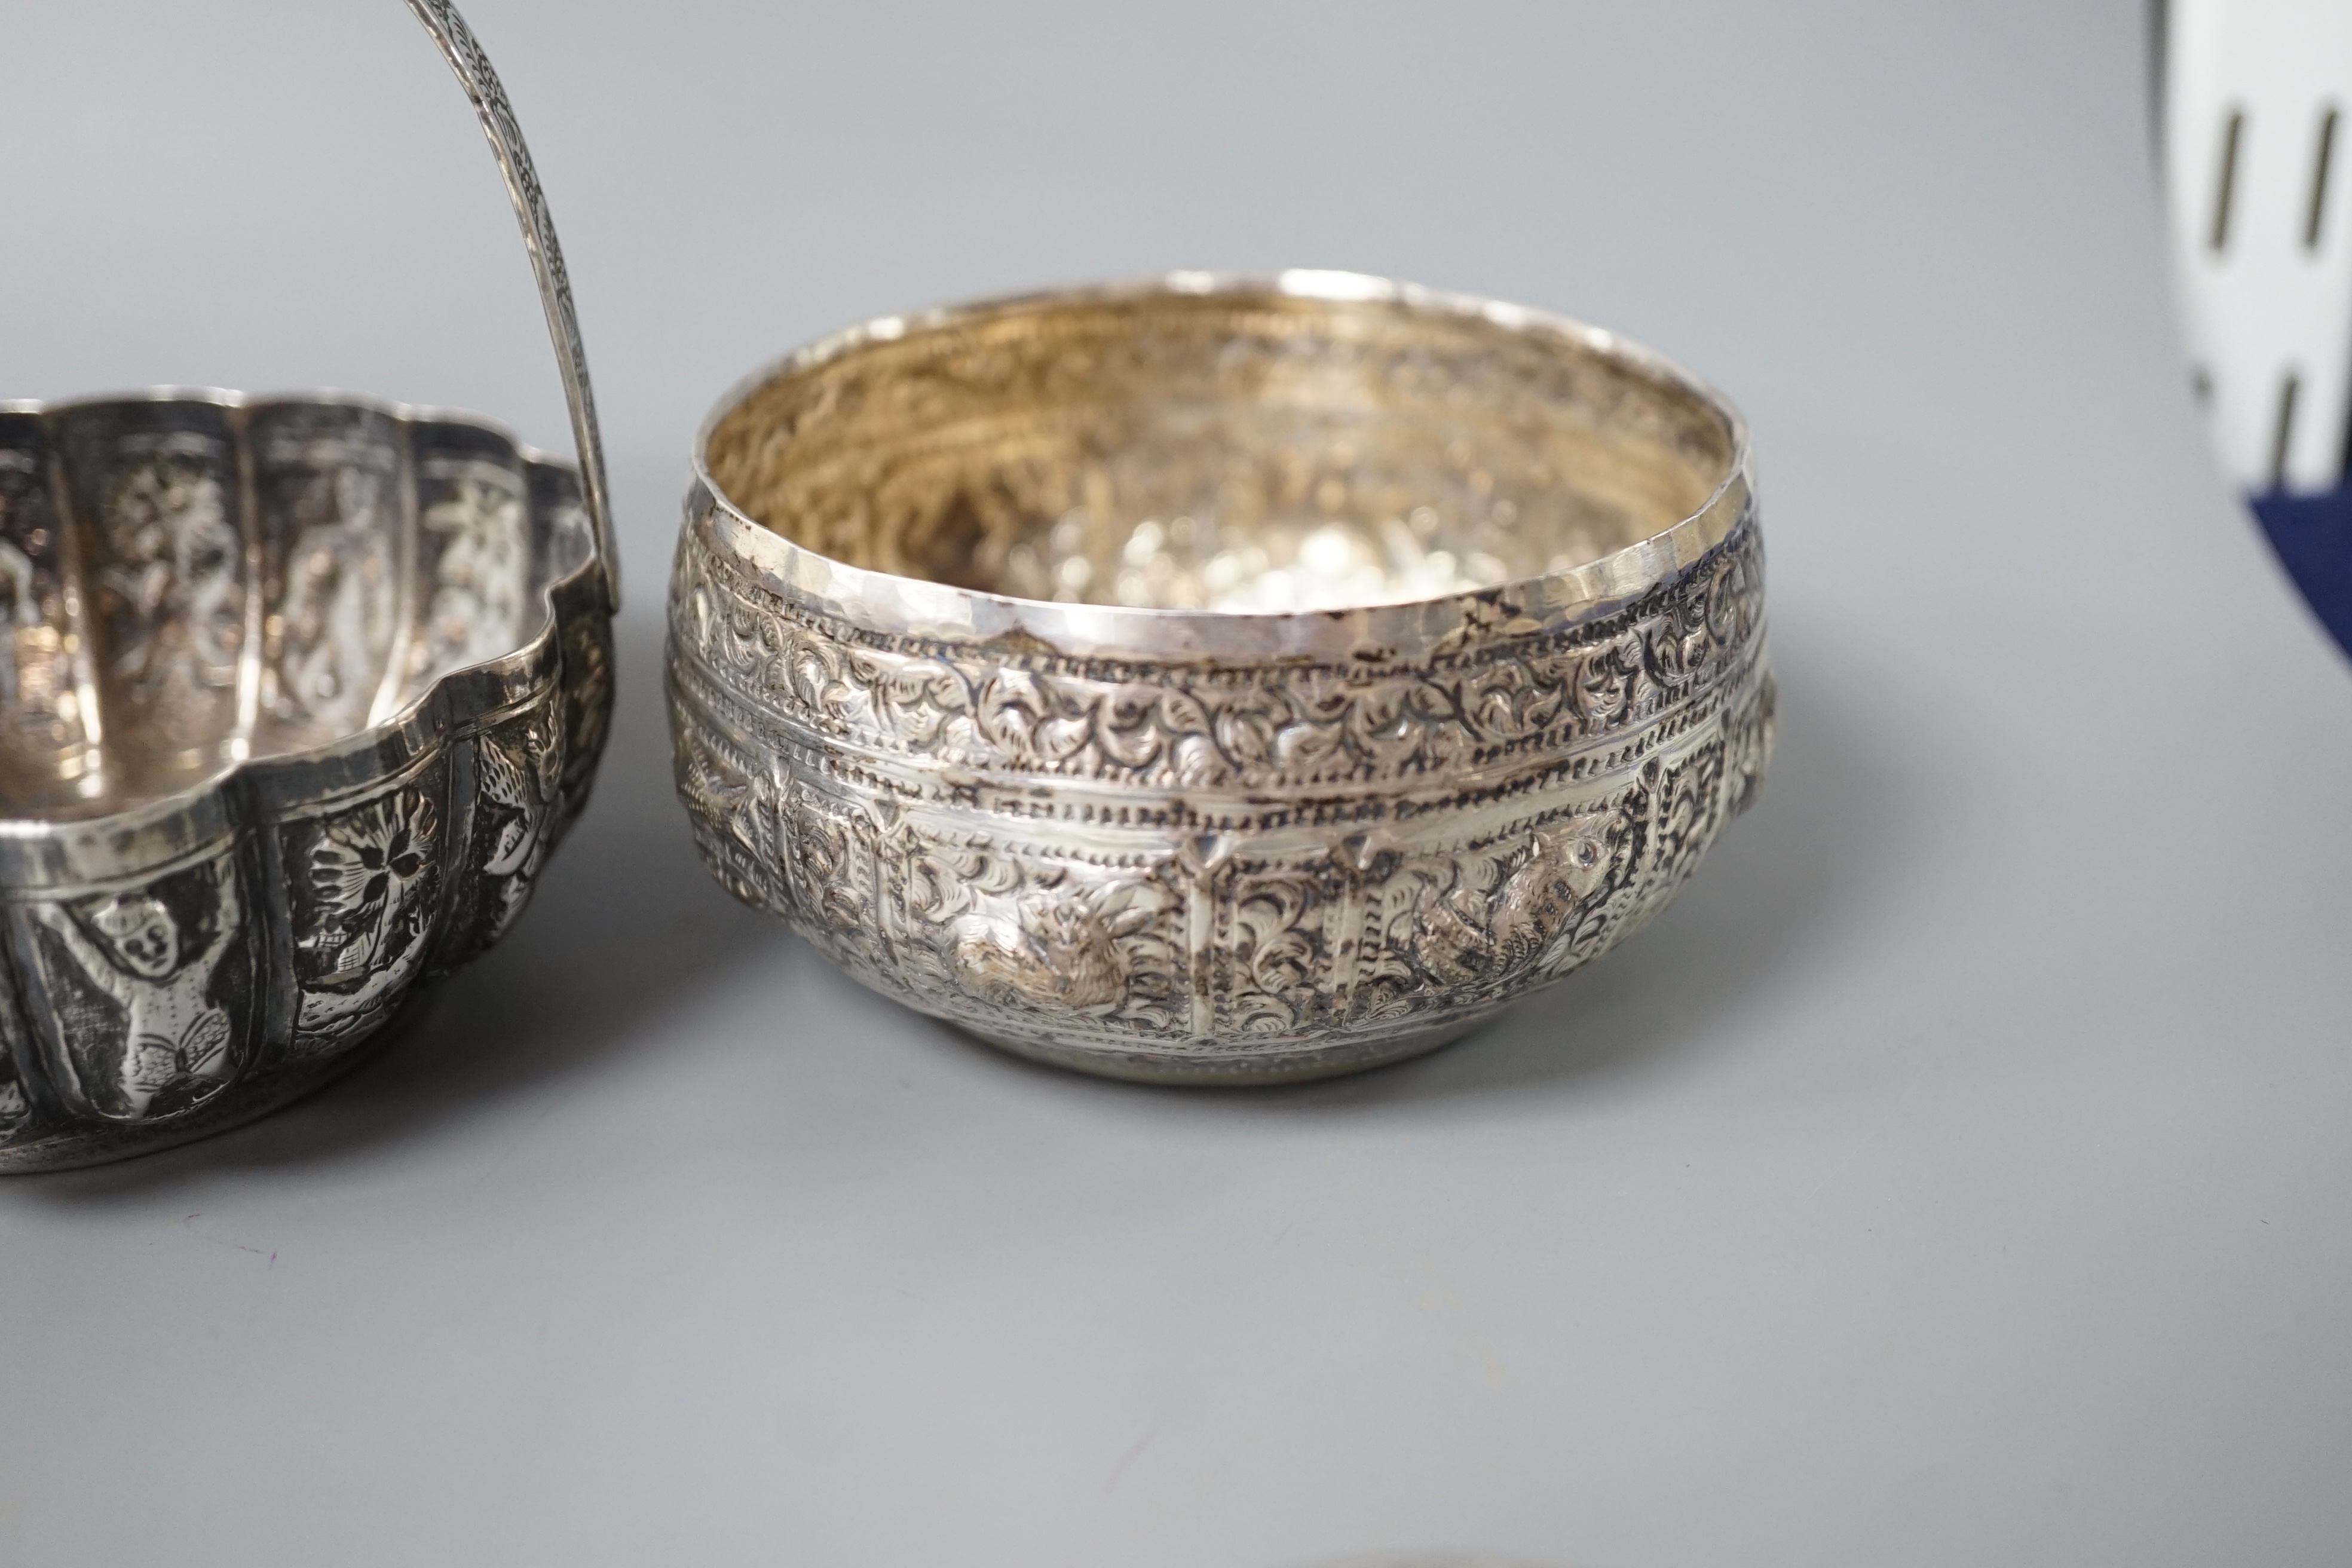 A Burmese? white metal bonbon basket, height 10.1cm and a similar bowl, two Persian white metal boxes and a spoon.